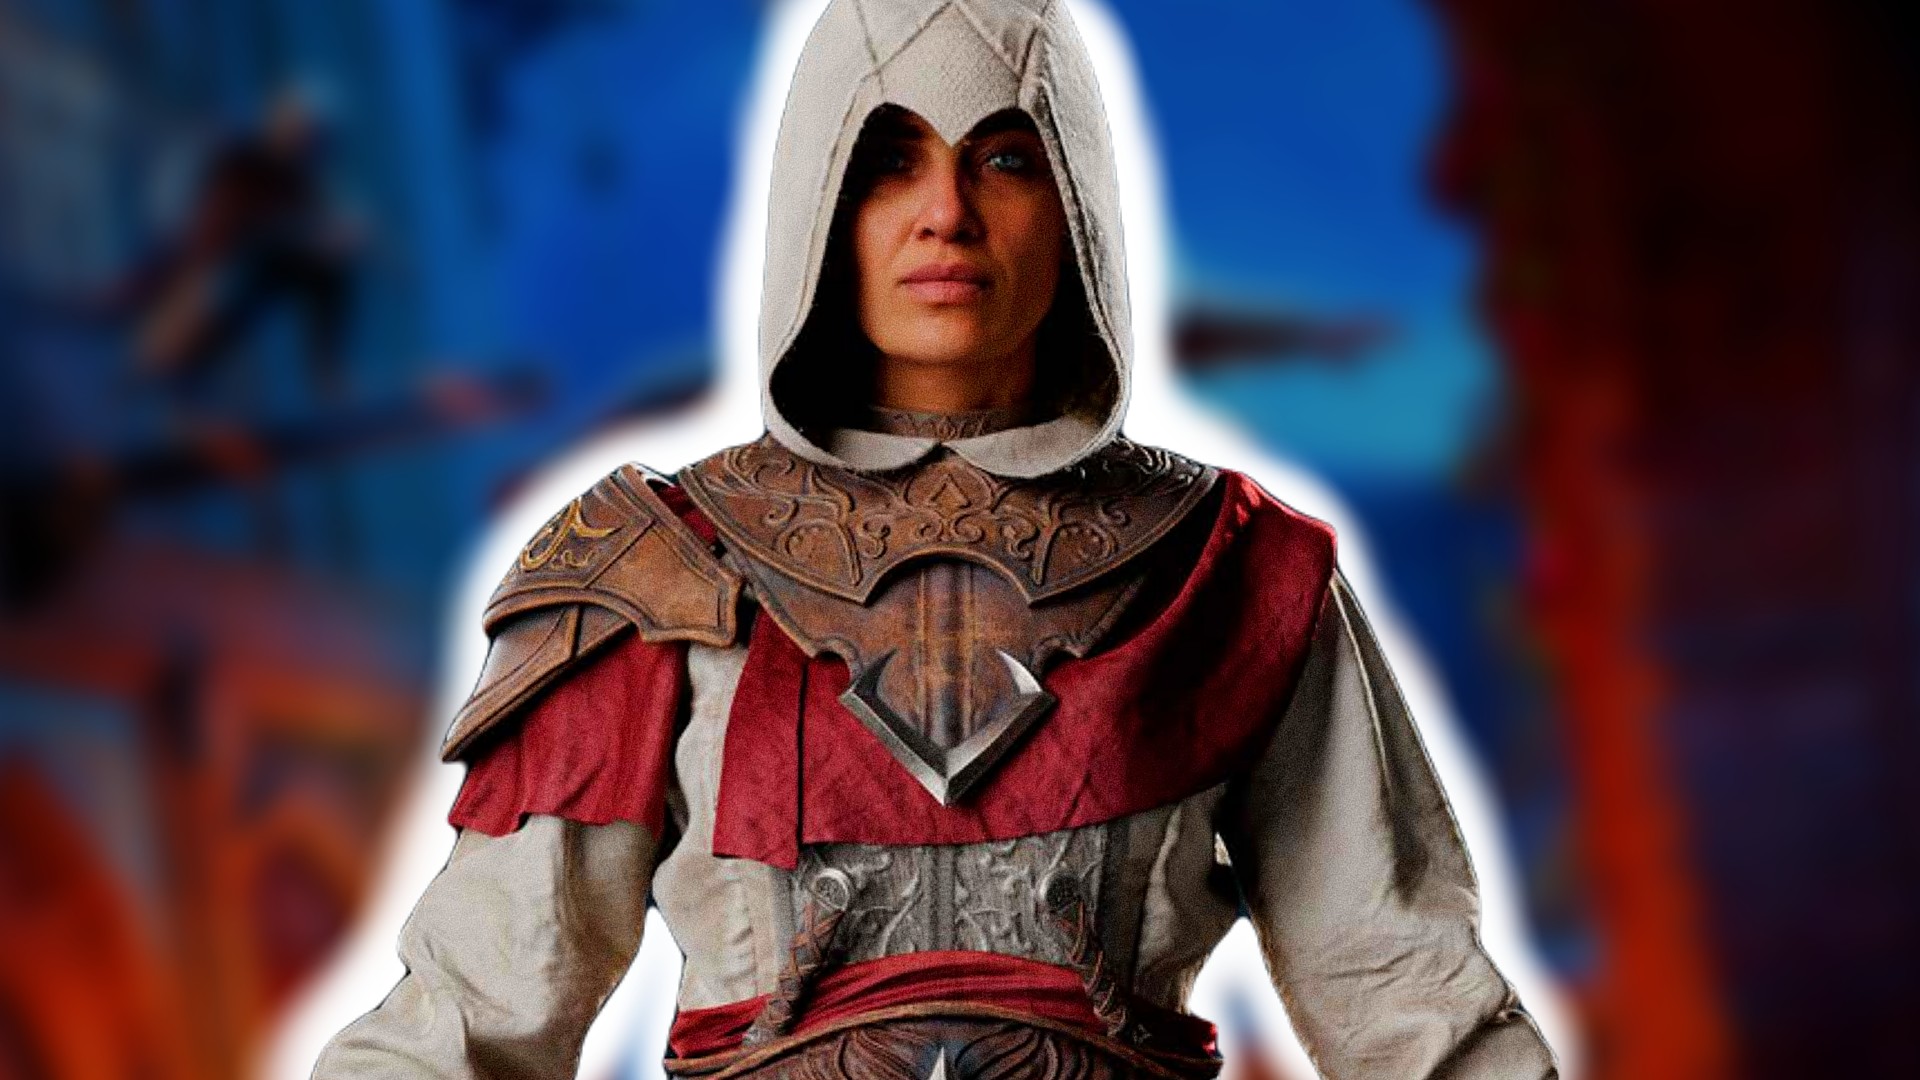 Assassin's Creed Writing Has Nothing to Do with Assassin's Creed